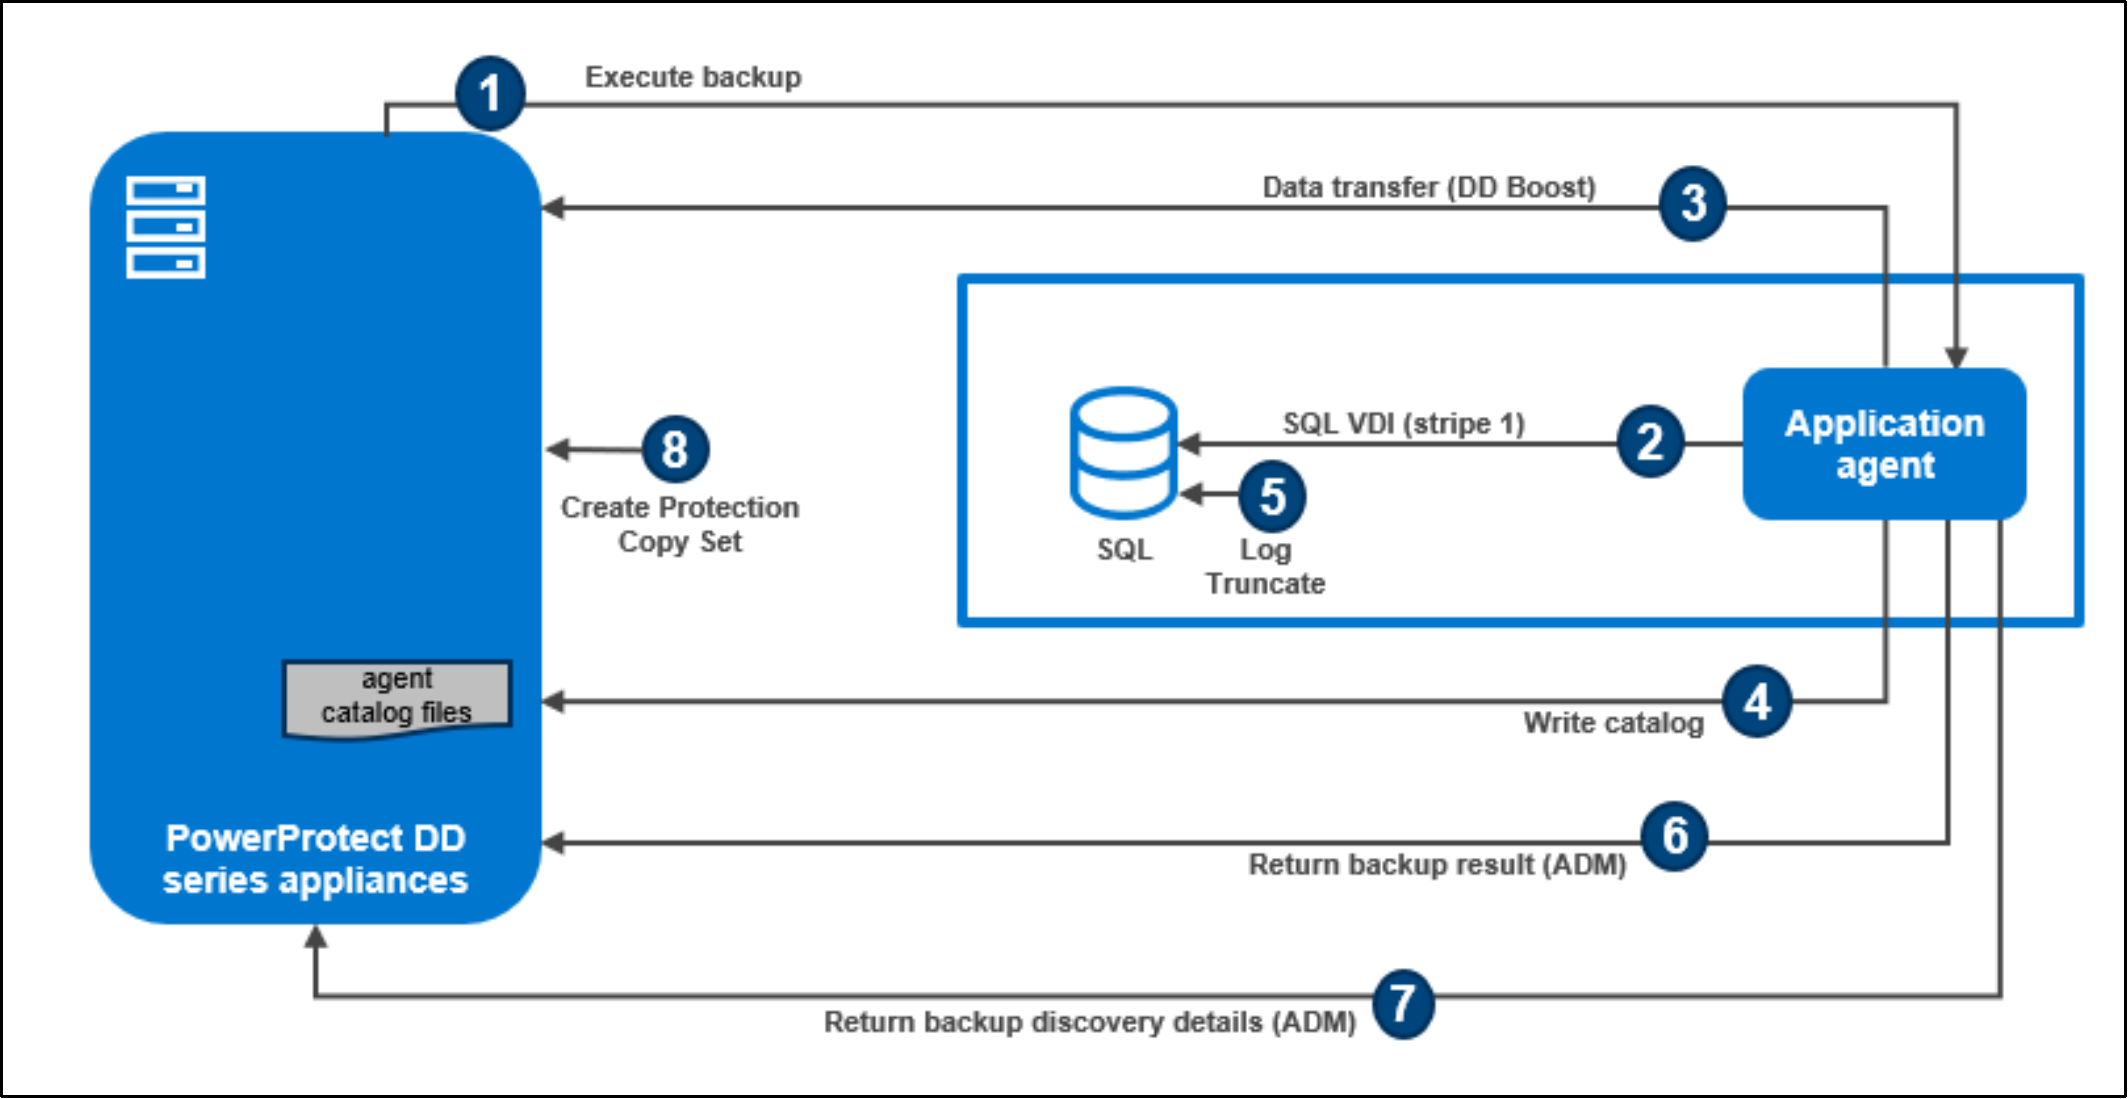 The image showing centralized Application Direct backup workflow (LOG)